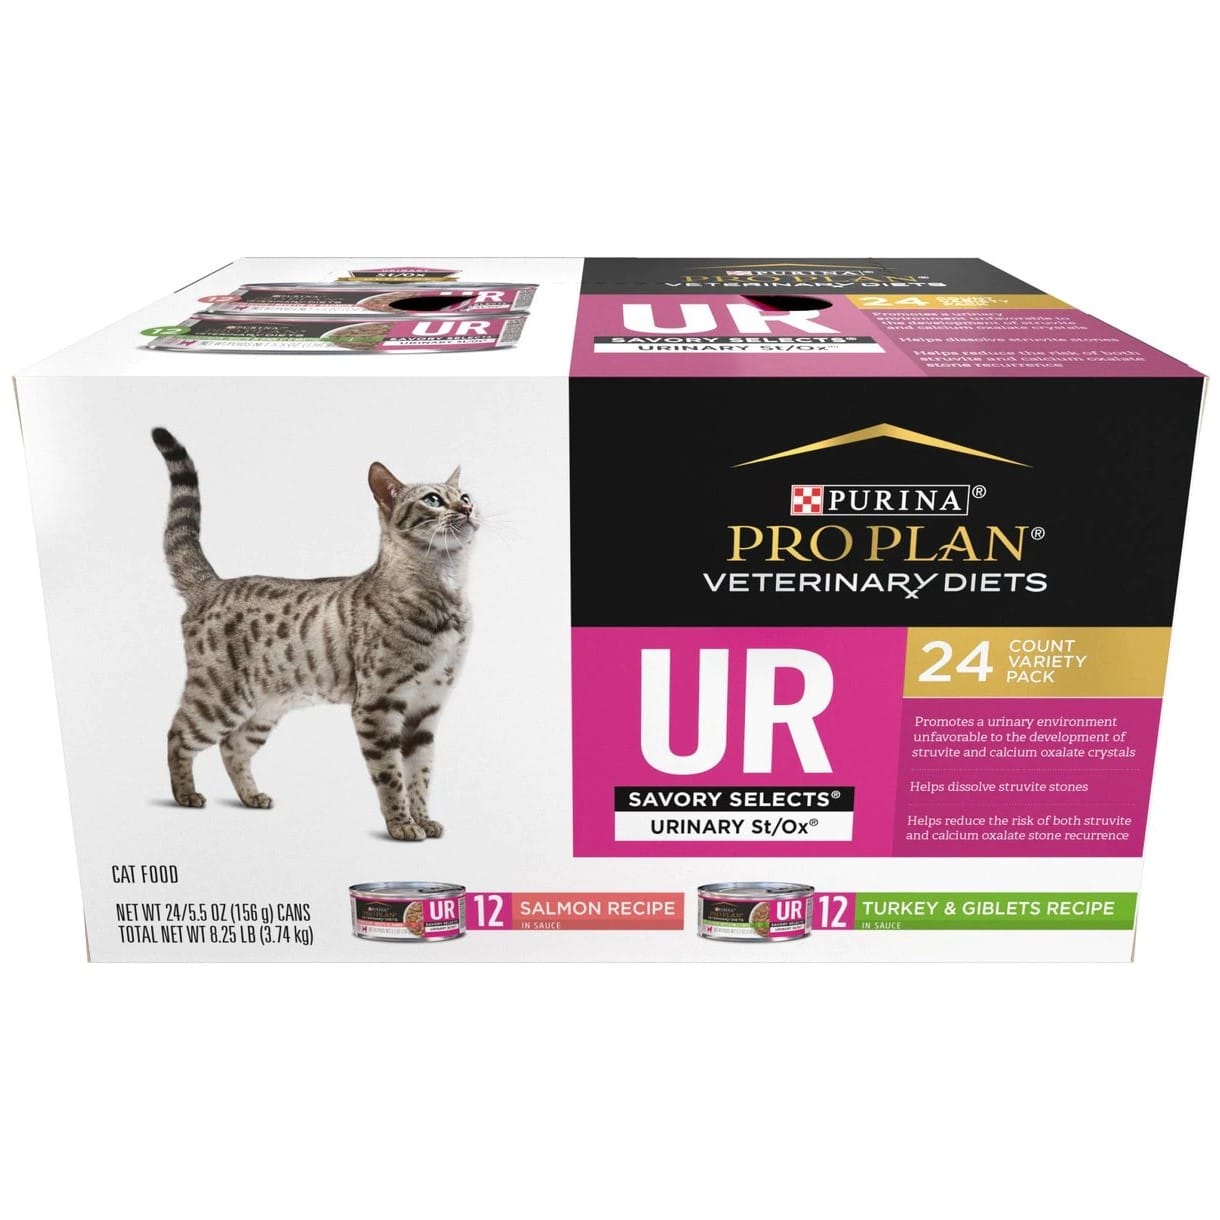 Purina Pro Plan Veterinary Diets UR Urinary St/Ox Savory Selects Variety Pack Wet Cat Food